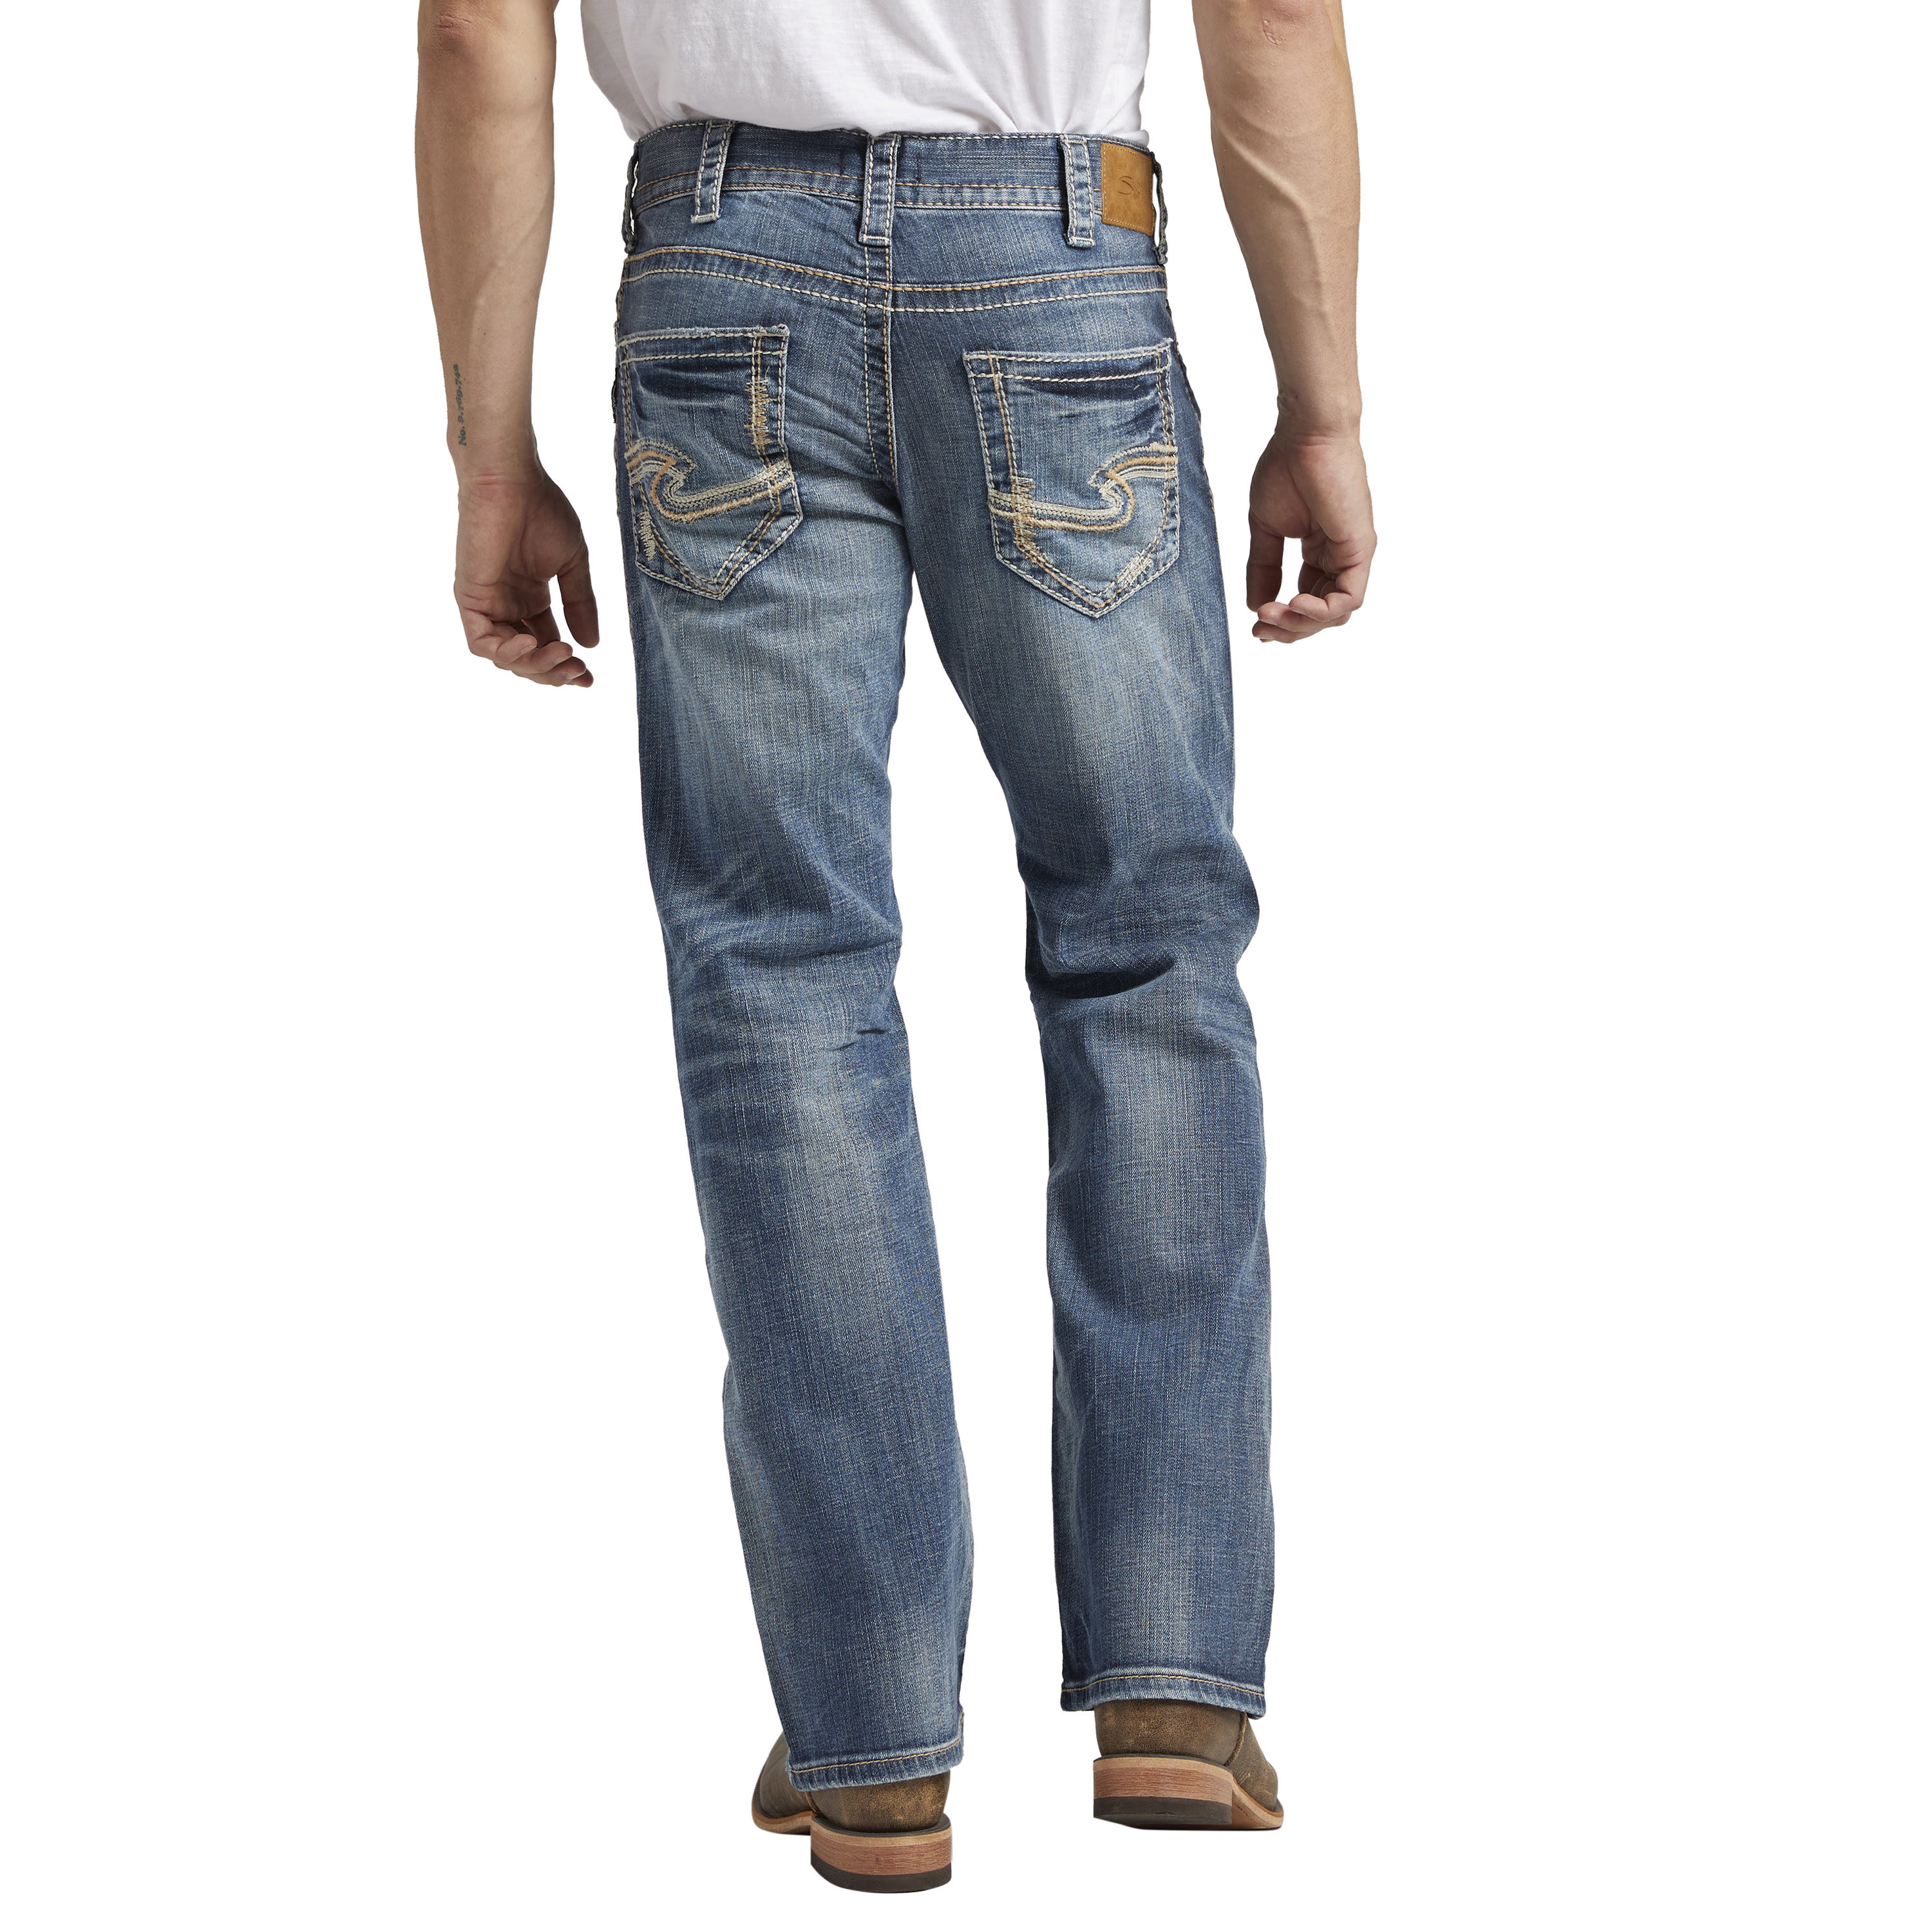 Silver Jeans Co. Men's Zac Relaxed Fit Straight Leg Jeans, Waist Sizes 30-42 - image 2 of 4